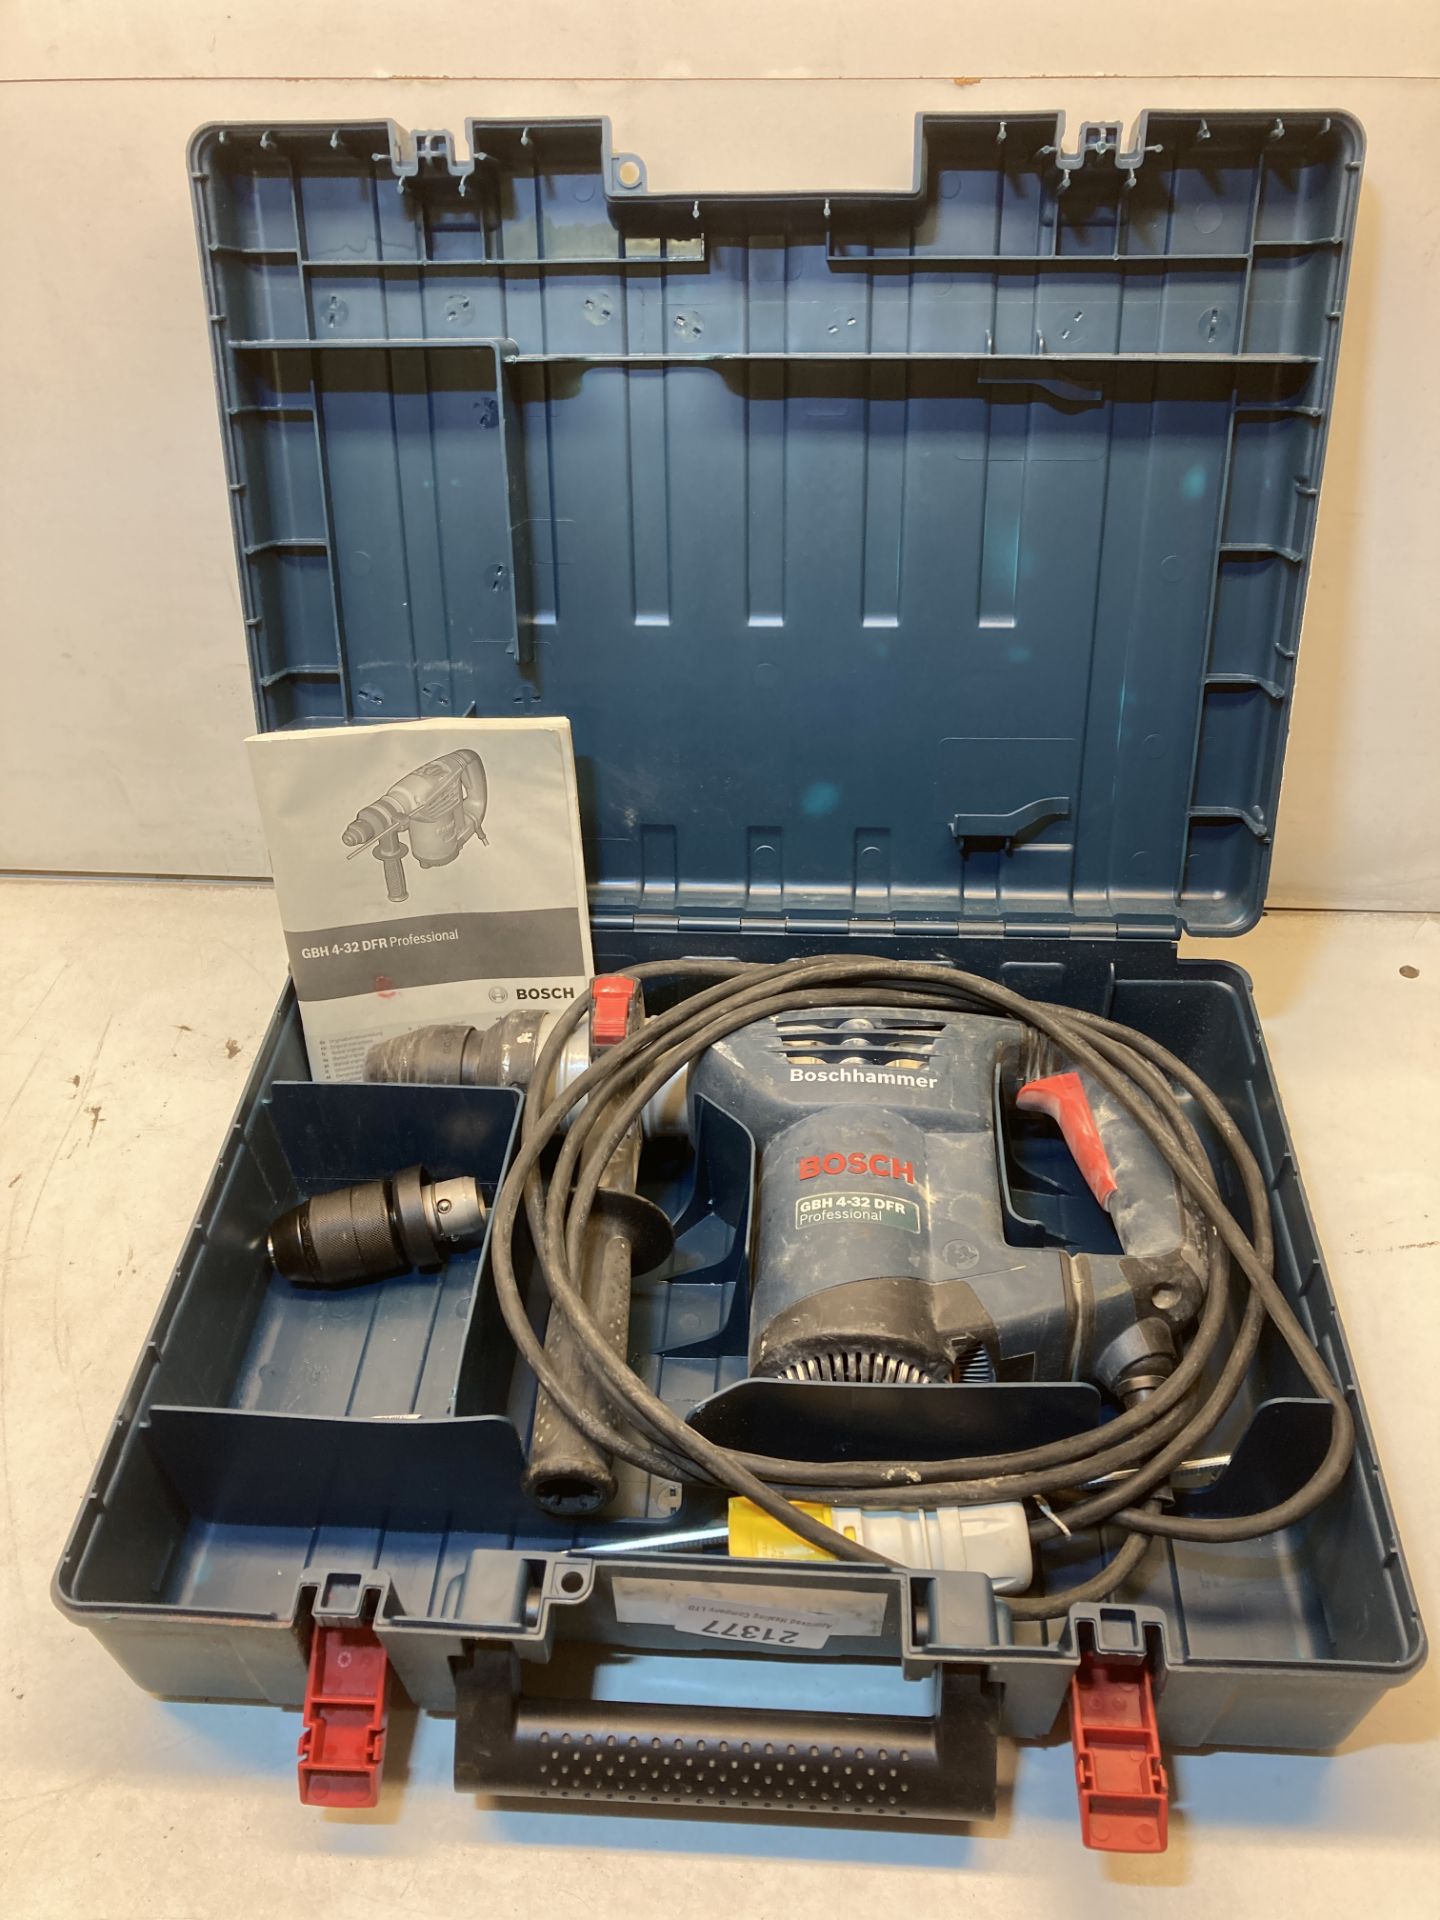 Bosch GBH 4-32 DFR Professional Rotary Hammer Drill W/ Case & Accessories| 110v